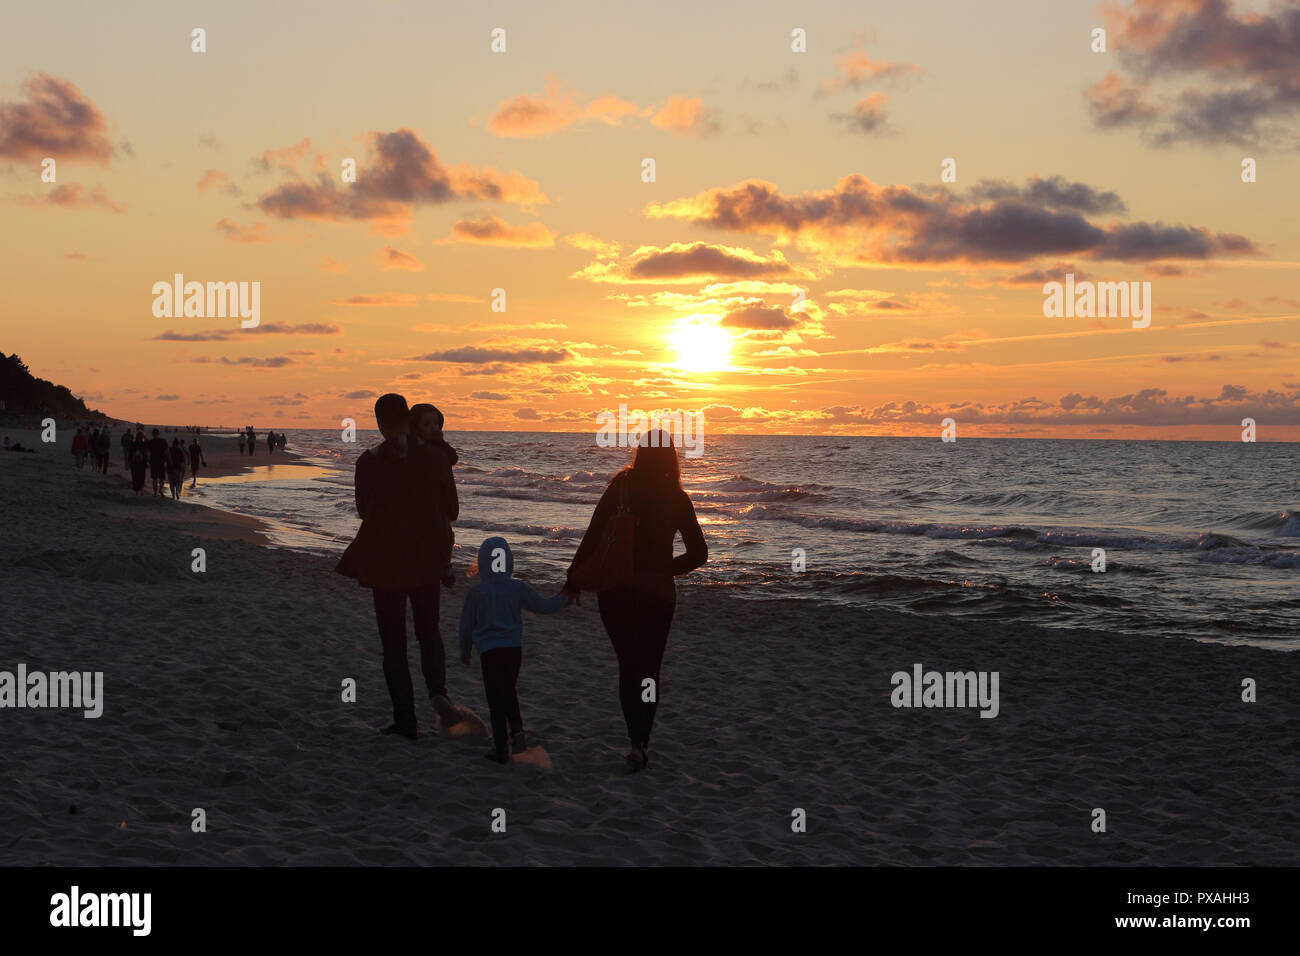 A young family stands on the beach and watches the sunset over the Baltic sea. Stock Photo